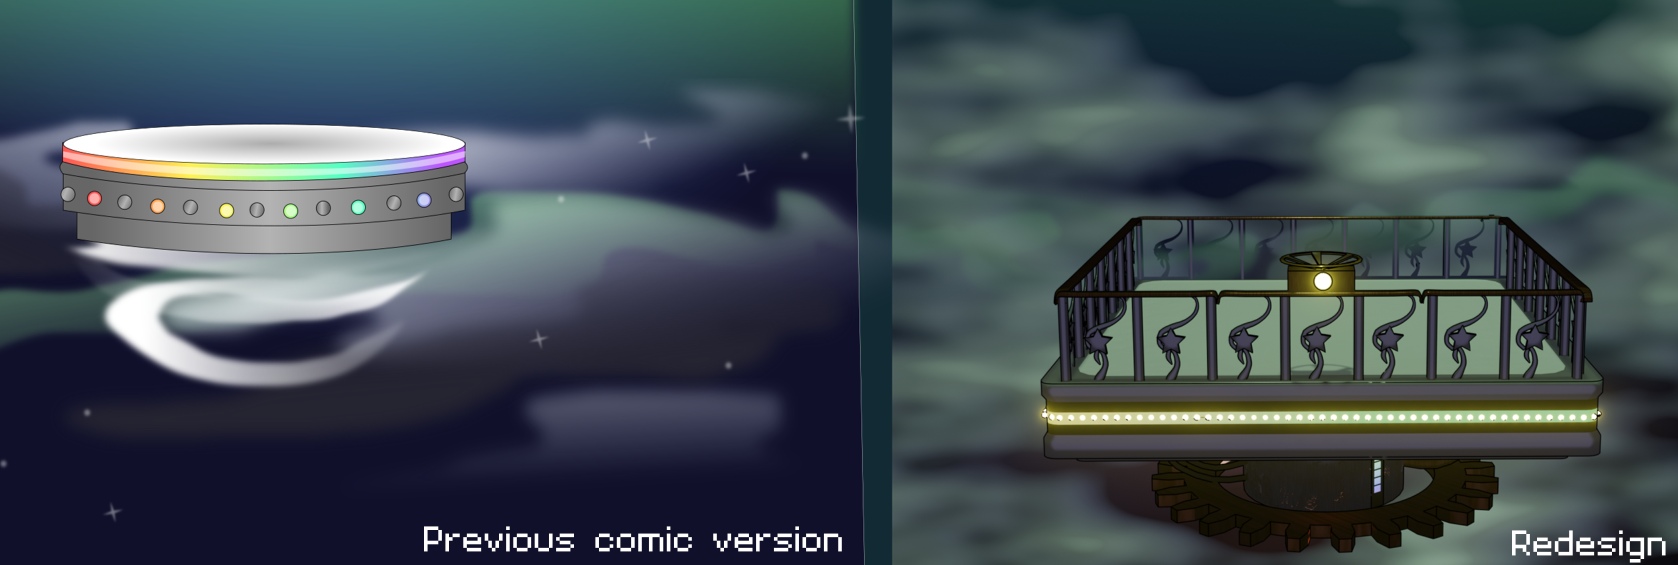 Image description: A side by side comparison of a floating platform that has colorful lights on it. To the left is the design from the previous comic version which is a simple round platform. To the right is the updated design for the webtoon; a more complex steampunk design with pipes, visible gears, rails and more lights.